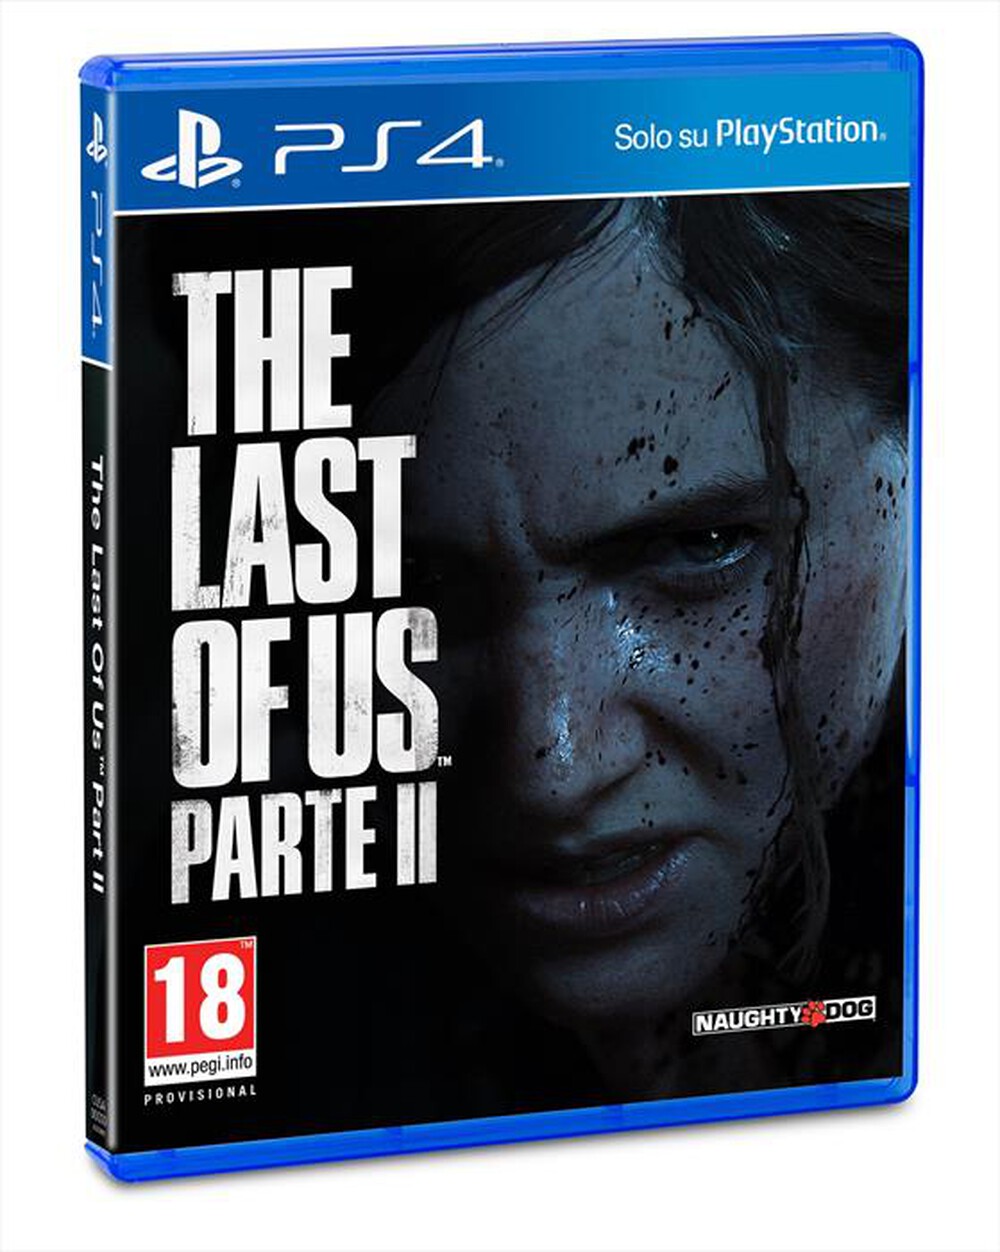 "SONY COMPUTER - THE LAST OF US PARTE II PS4"